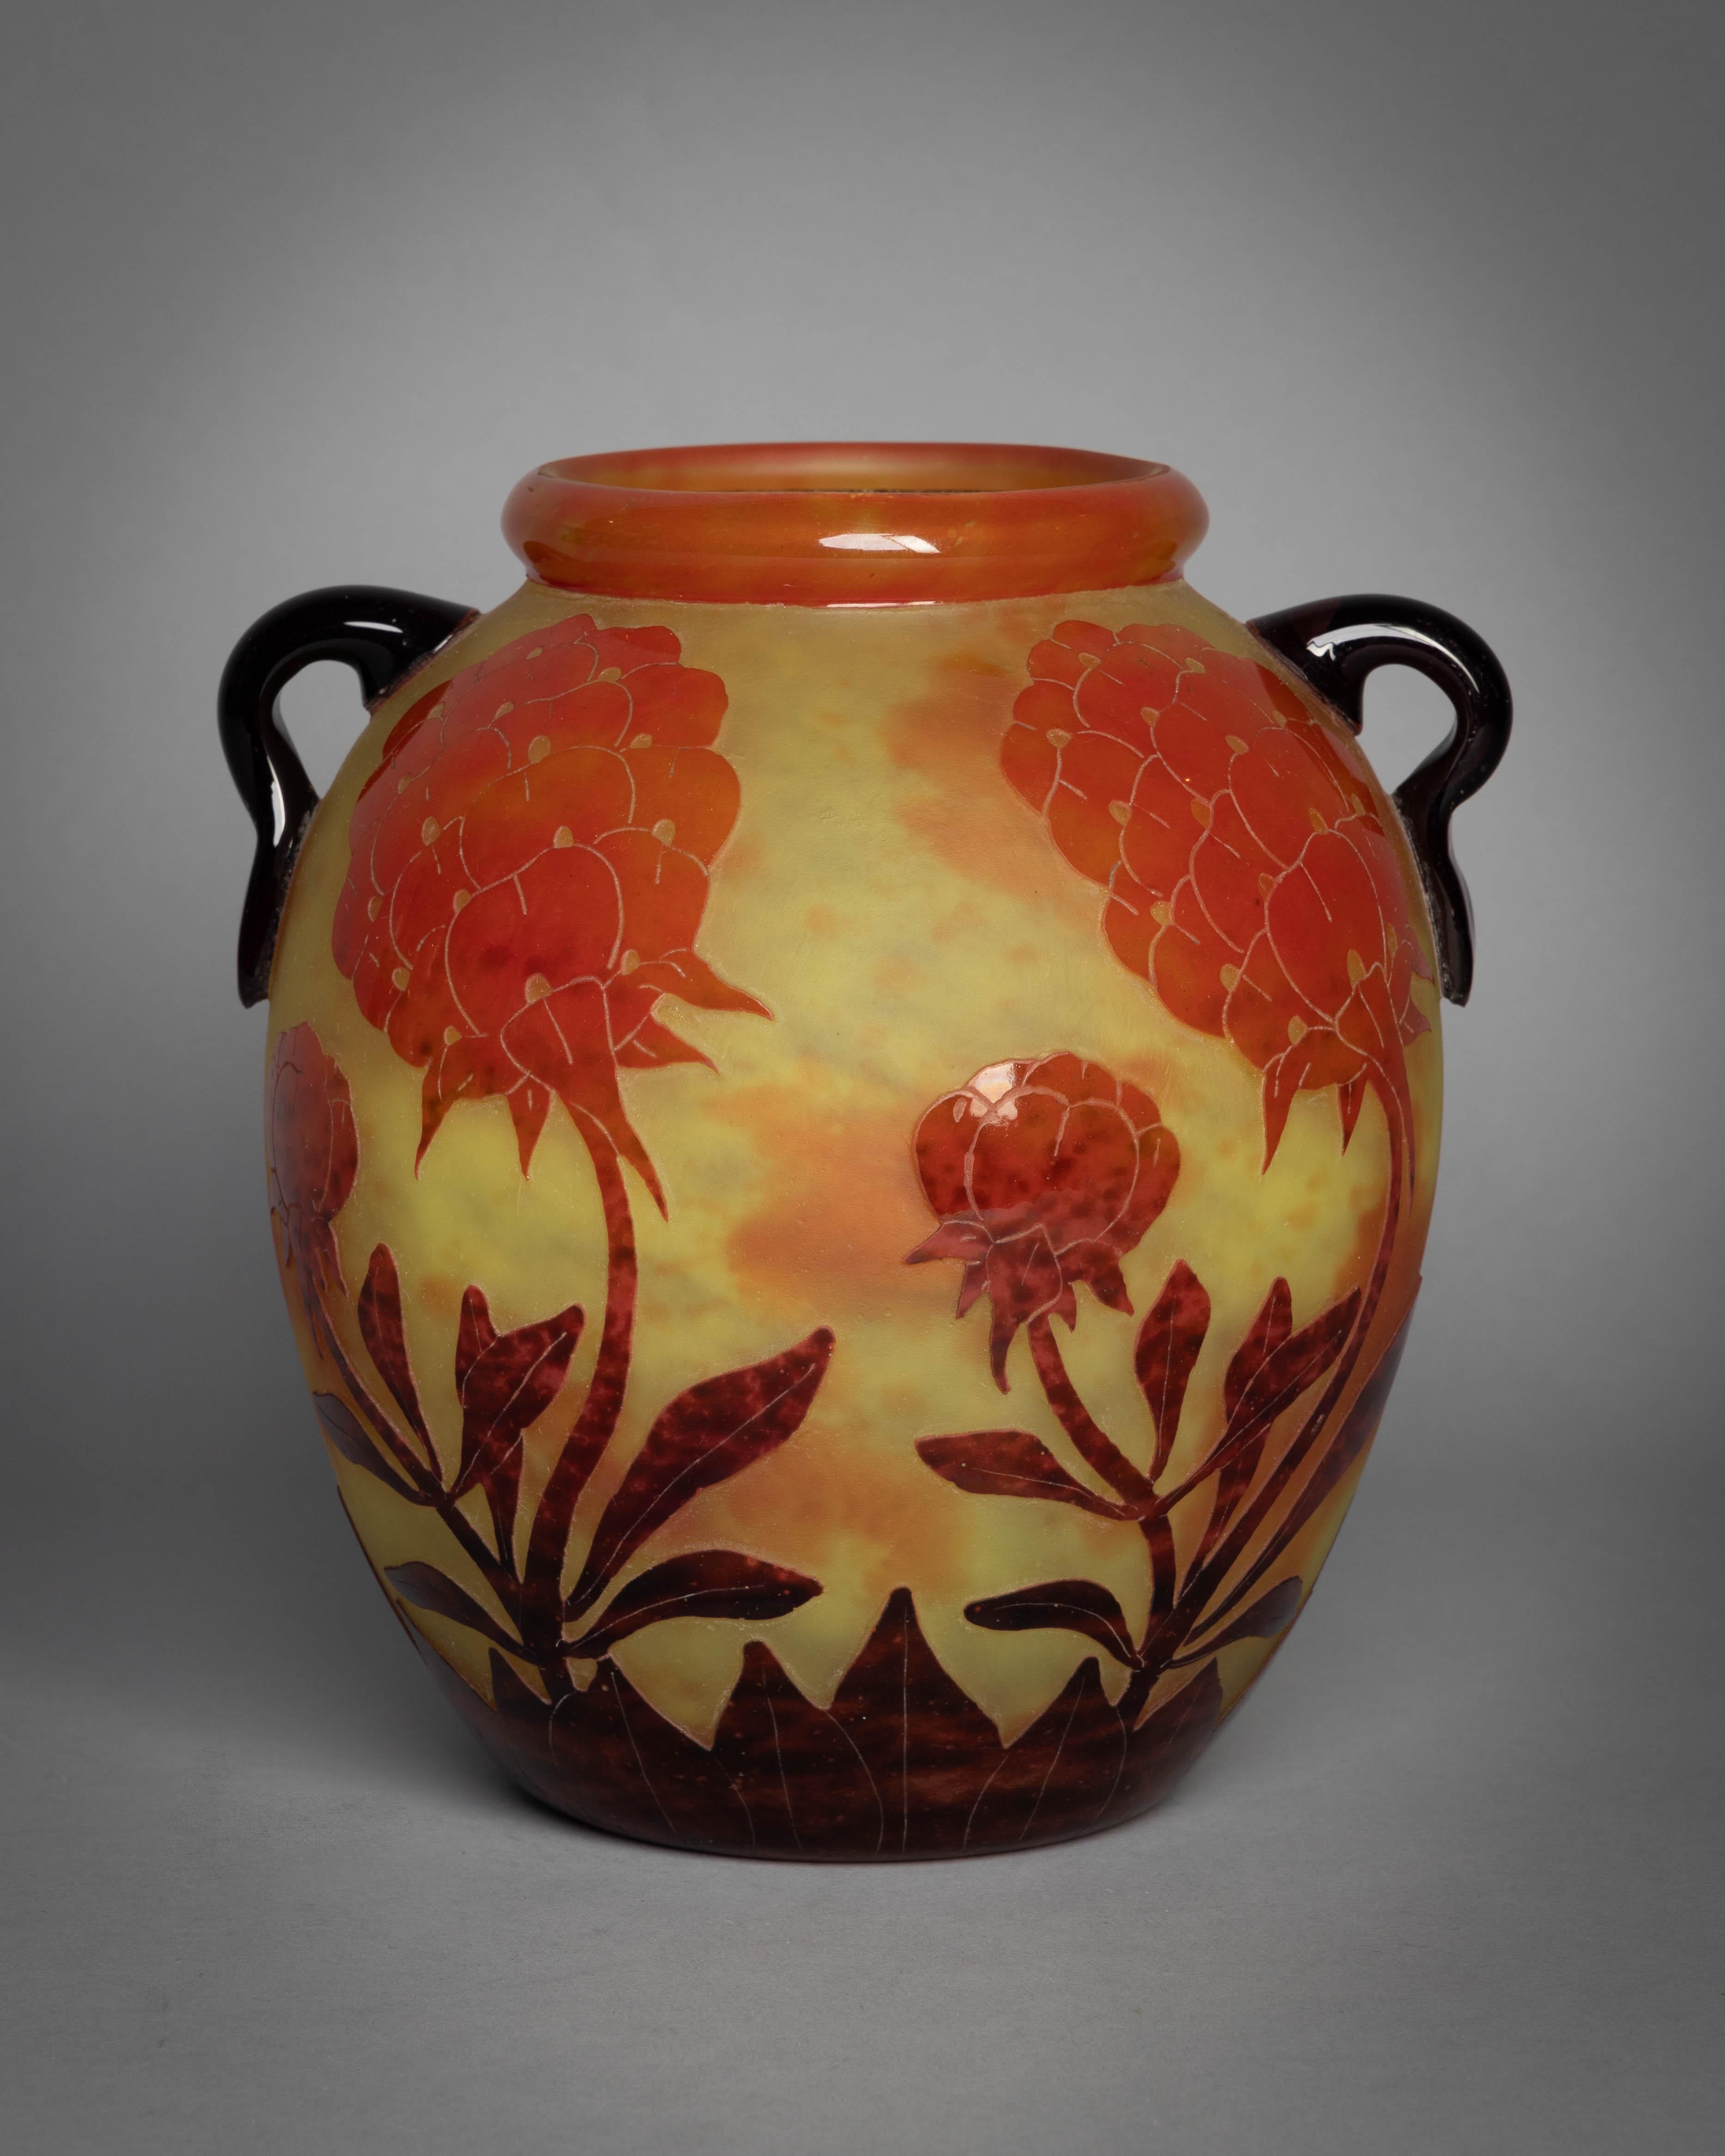 Yellow glass overlaid with orange and brown and etched with stylized peonies and leaves, cameo mark Charder, engraved Le Verre Français, acid-stamped FRANCE.